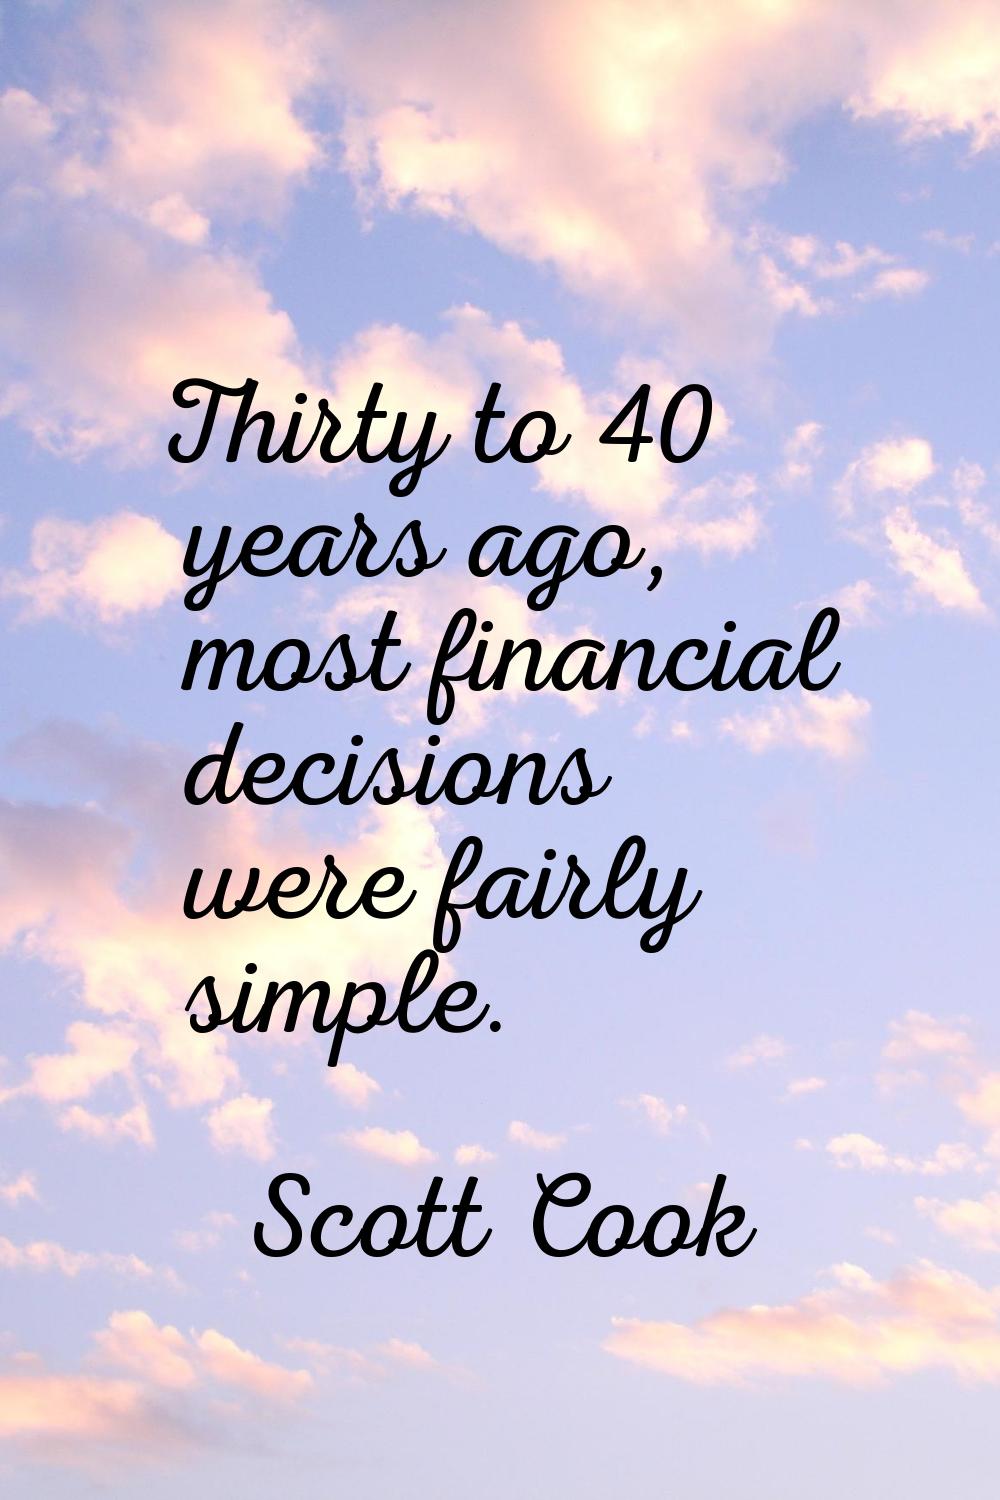 Thirty to 40 years ago, most financial decisions were fairly simple.